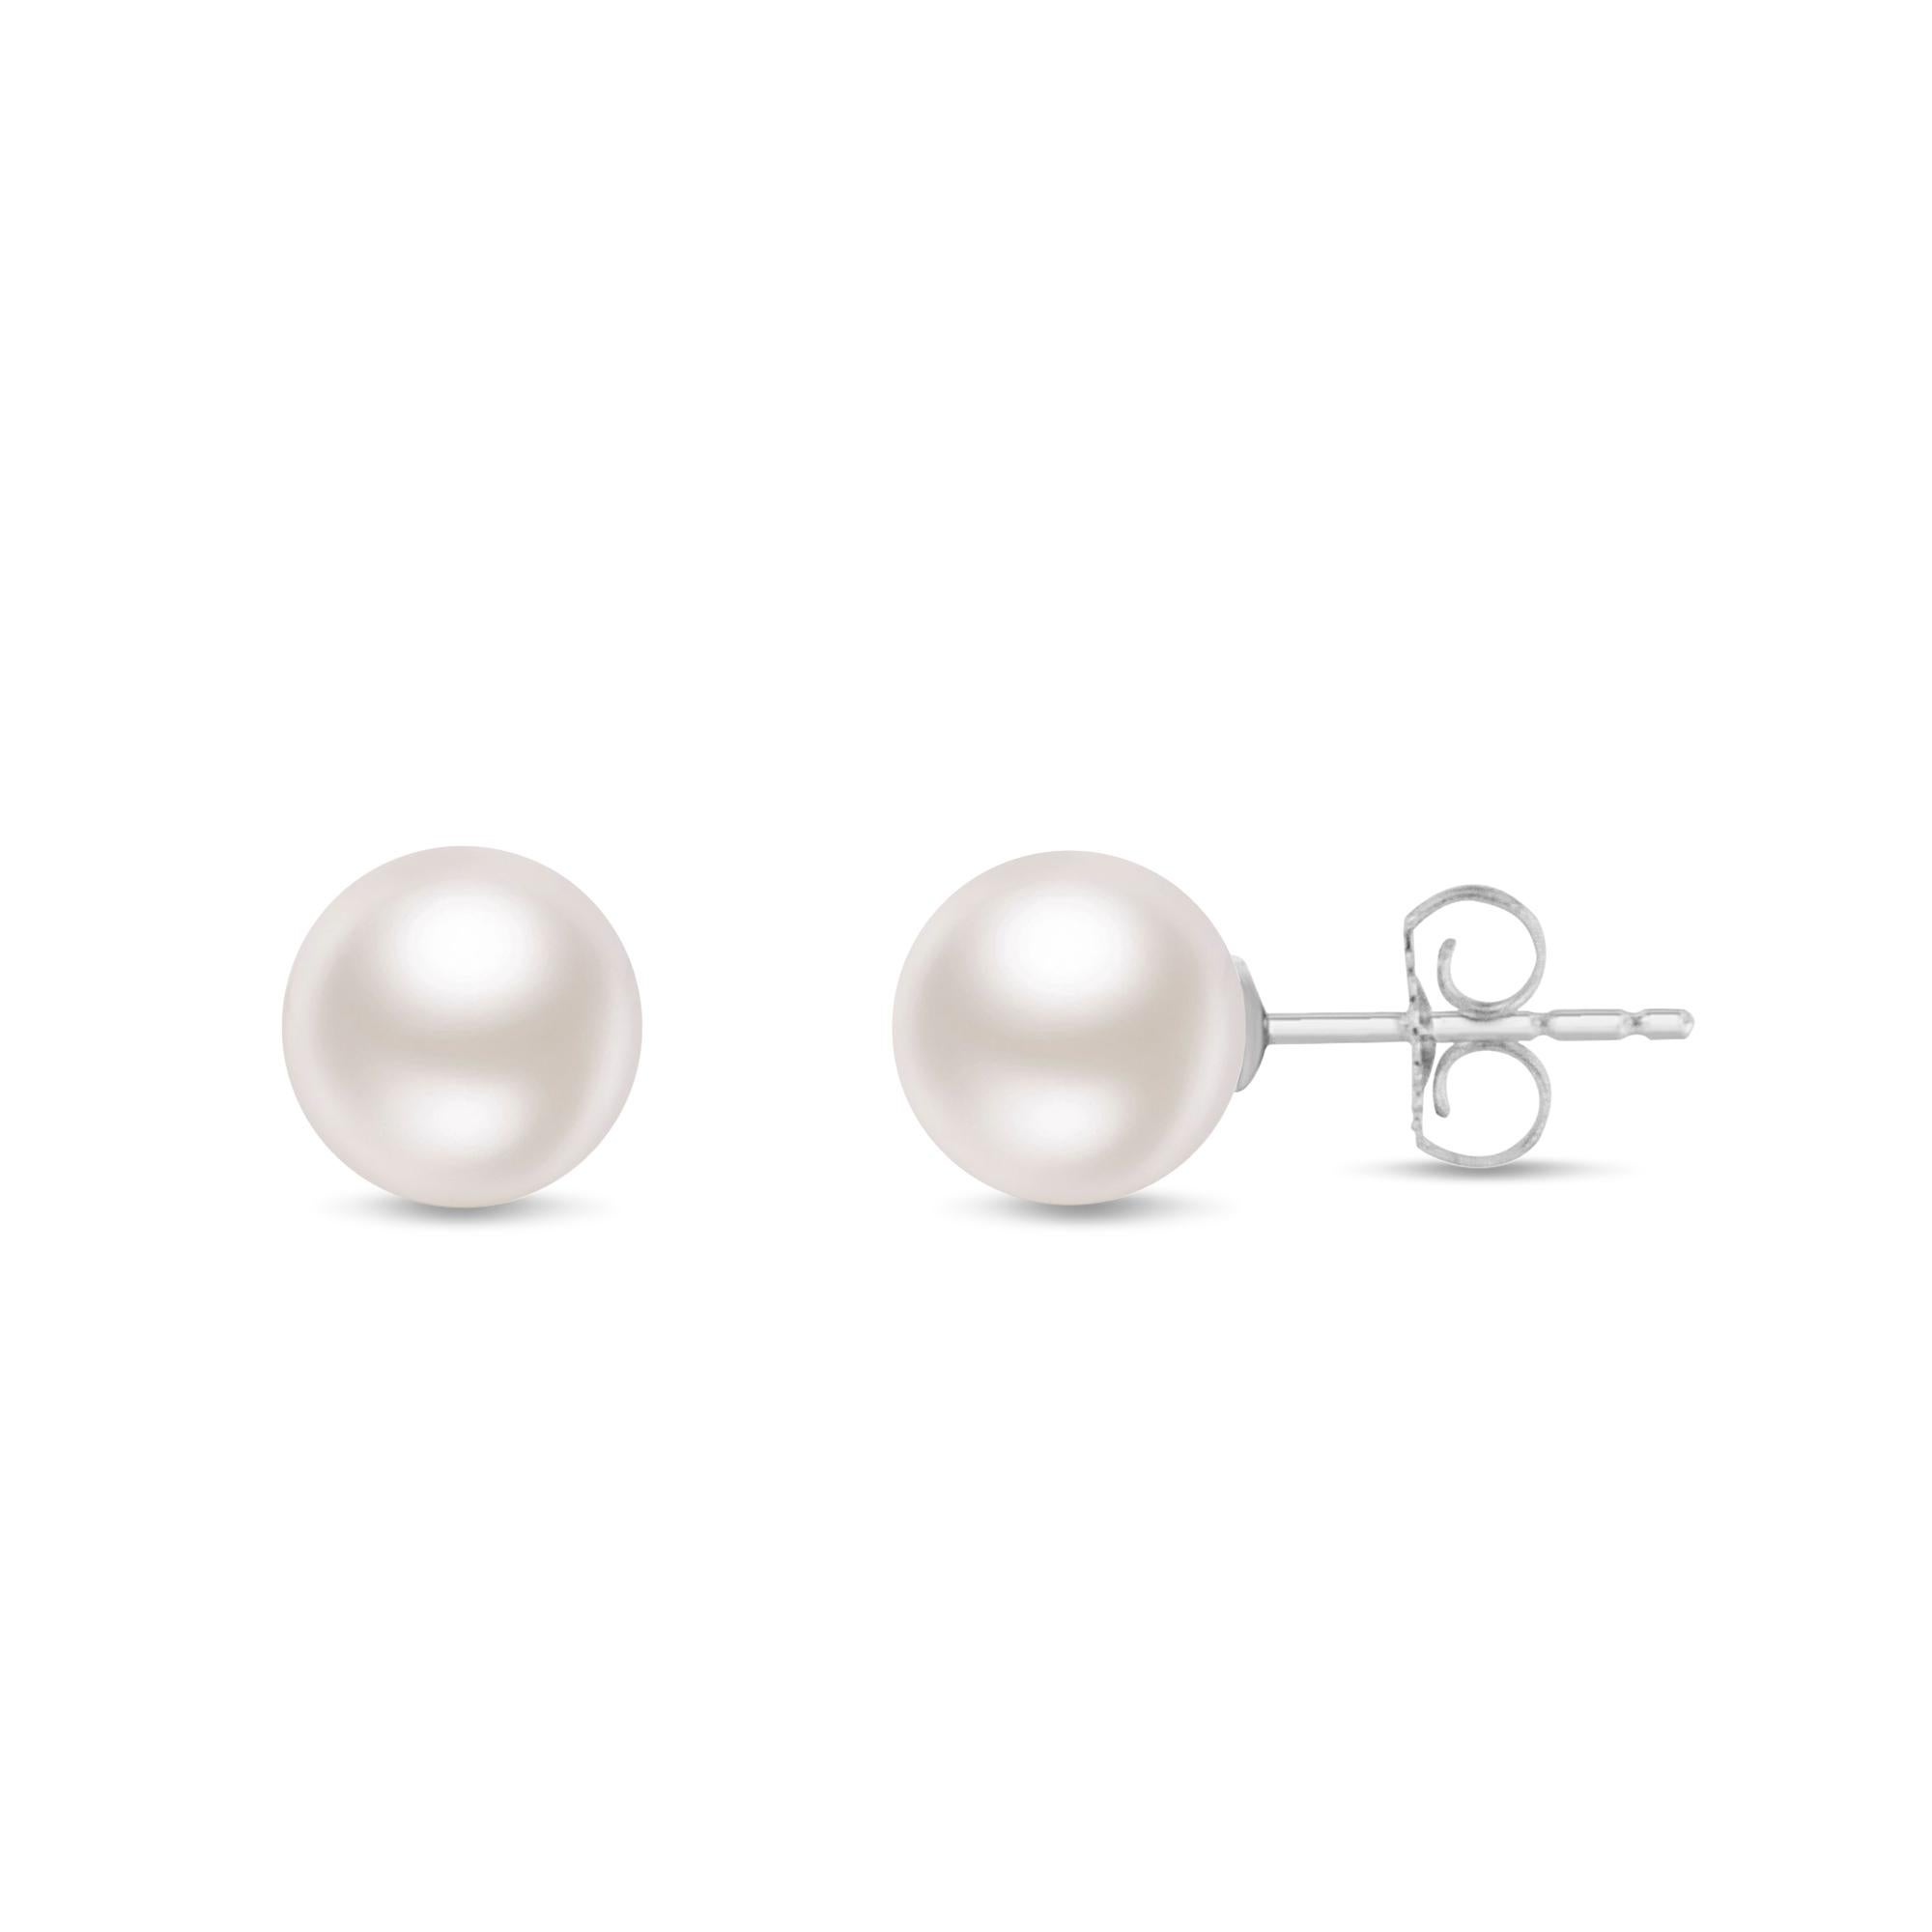 Sweet, sophisticated and seemingly simple, our stunning Akoya Pearls are totally enchanting, with an ever-vibrant luminosity dancing across their radiant surfaces. These 7-7.5MM, cultured white with pink overtone Akoya Pearls are of the highest